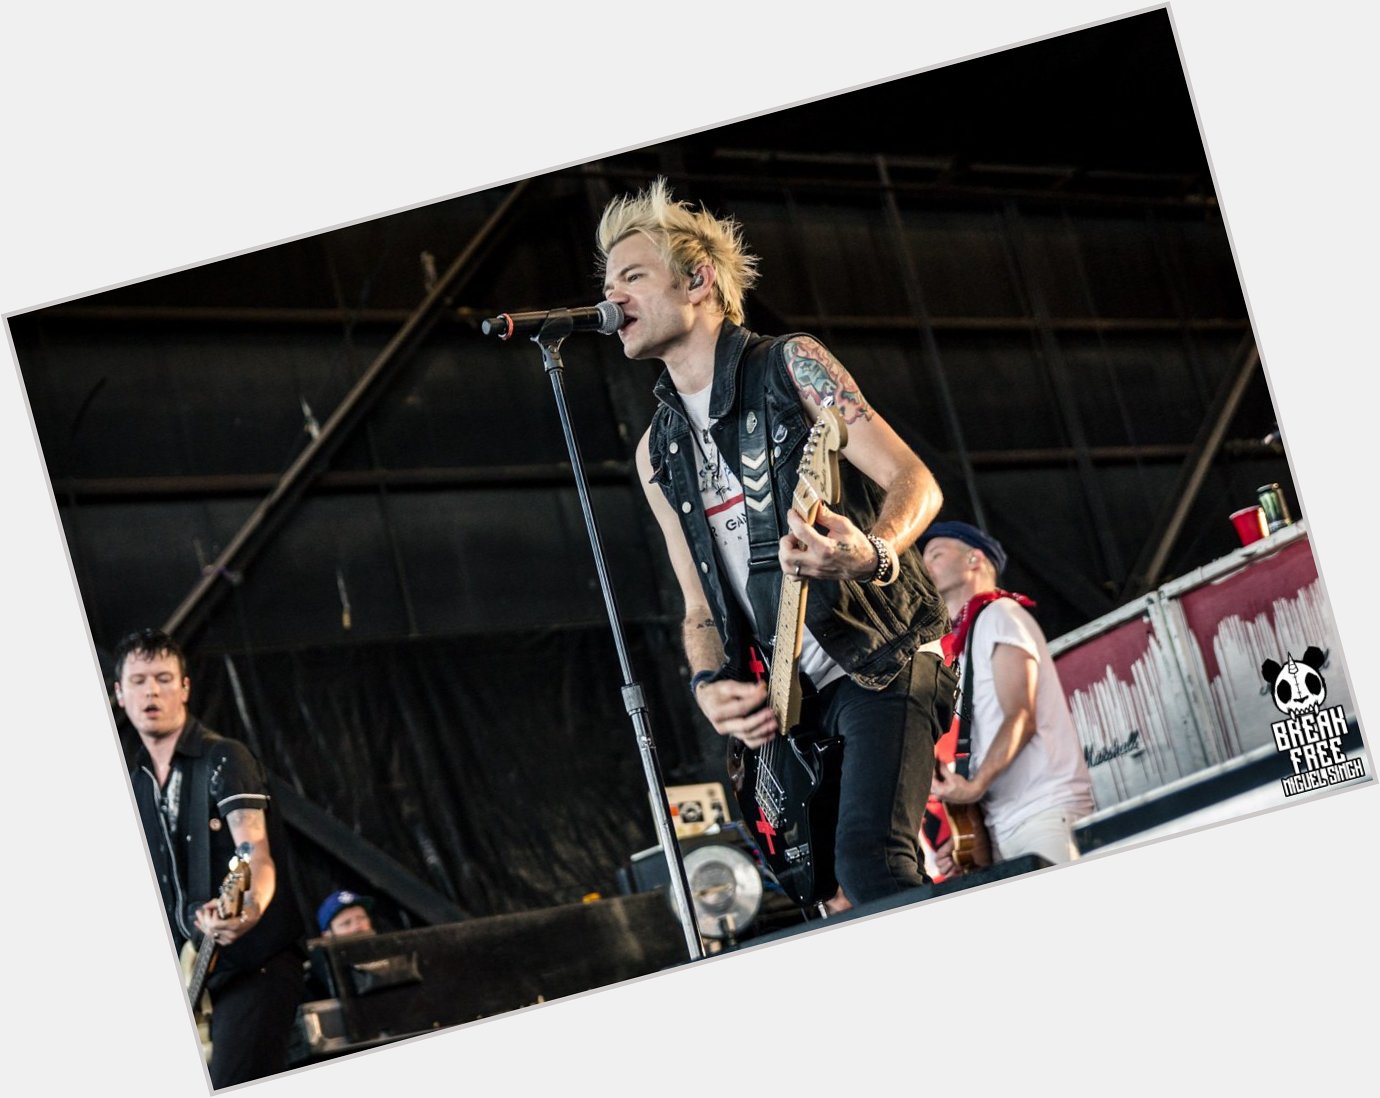 We would like to wish Deryck Whibley a very happy birthday today  